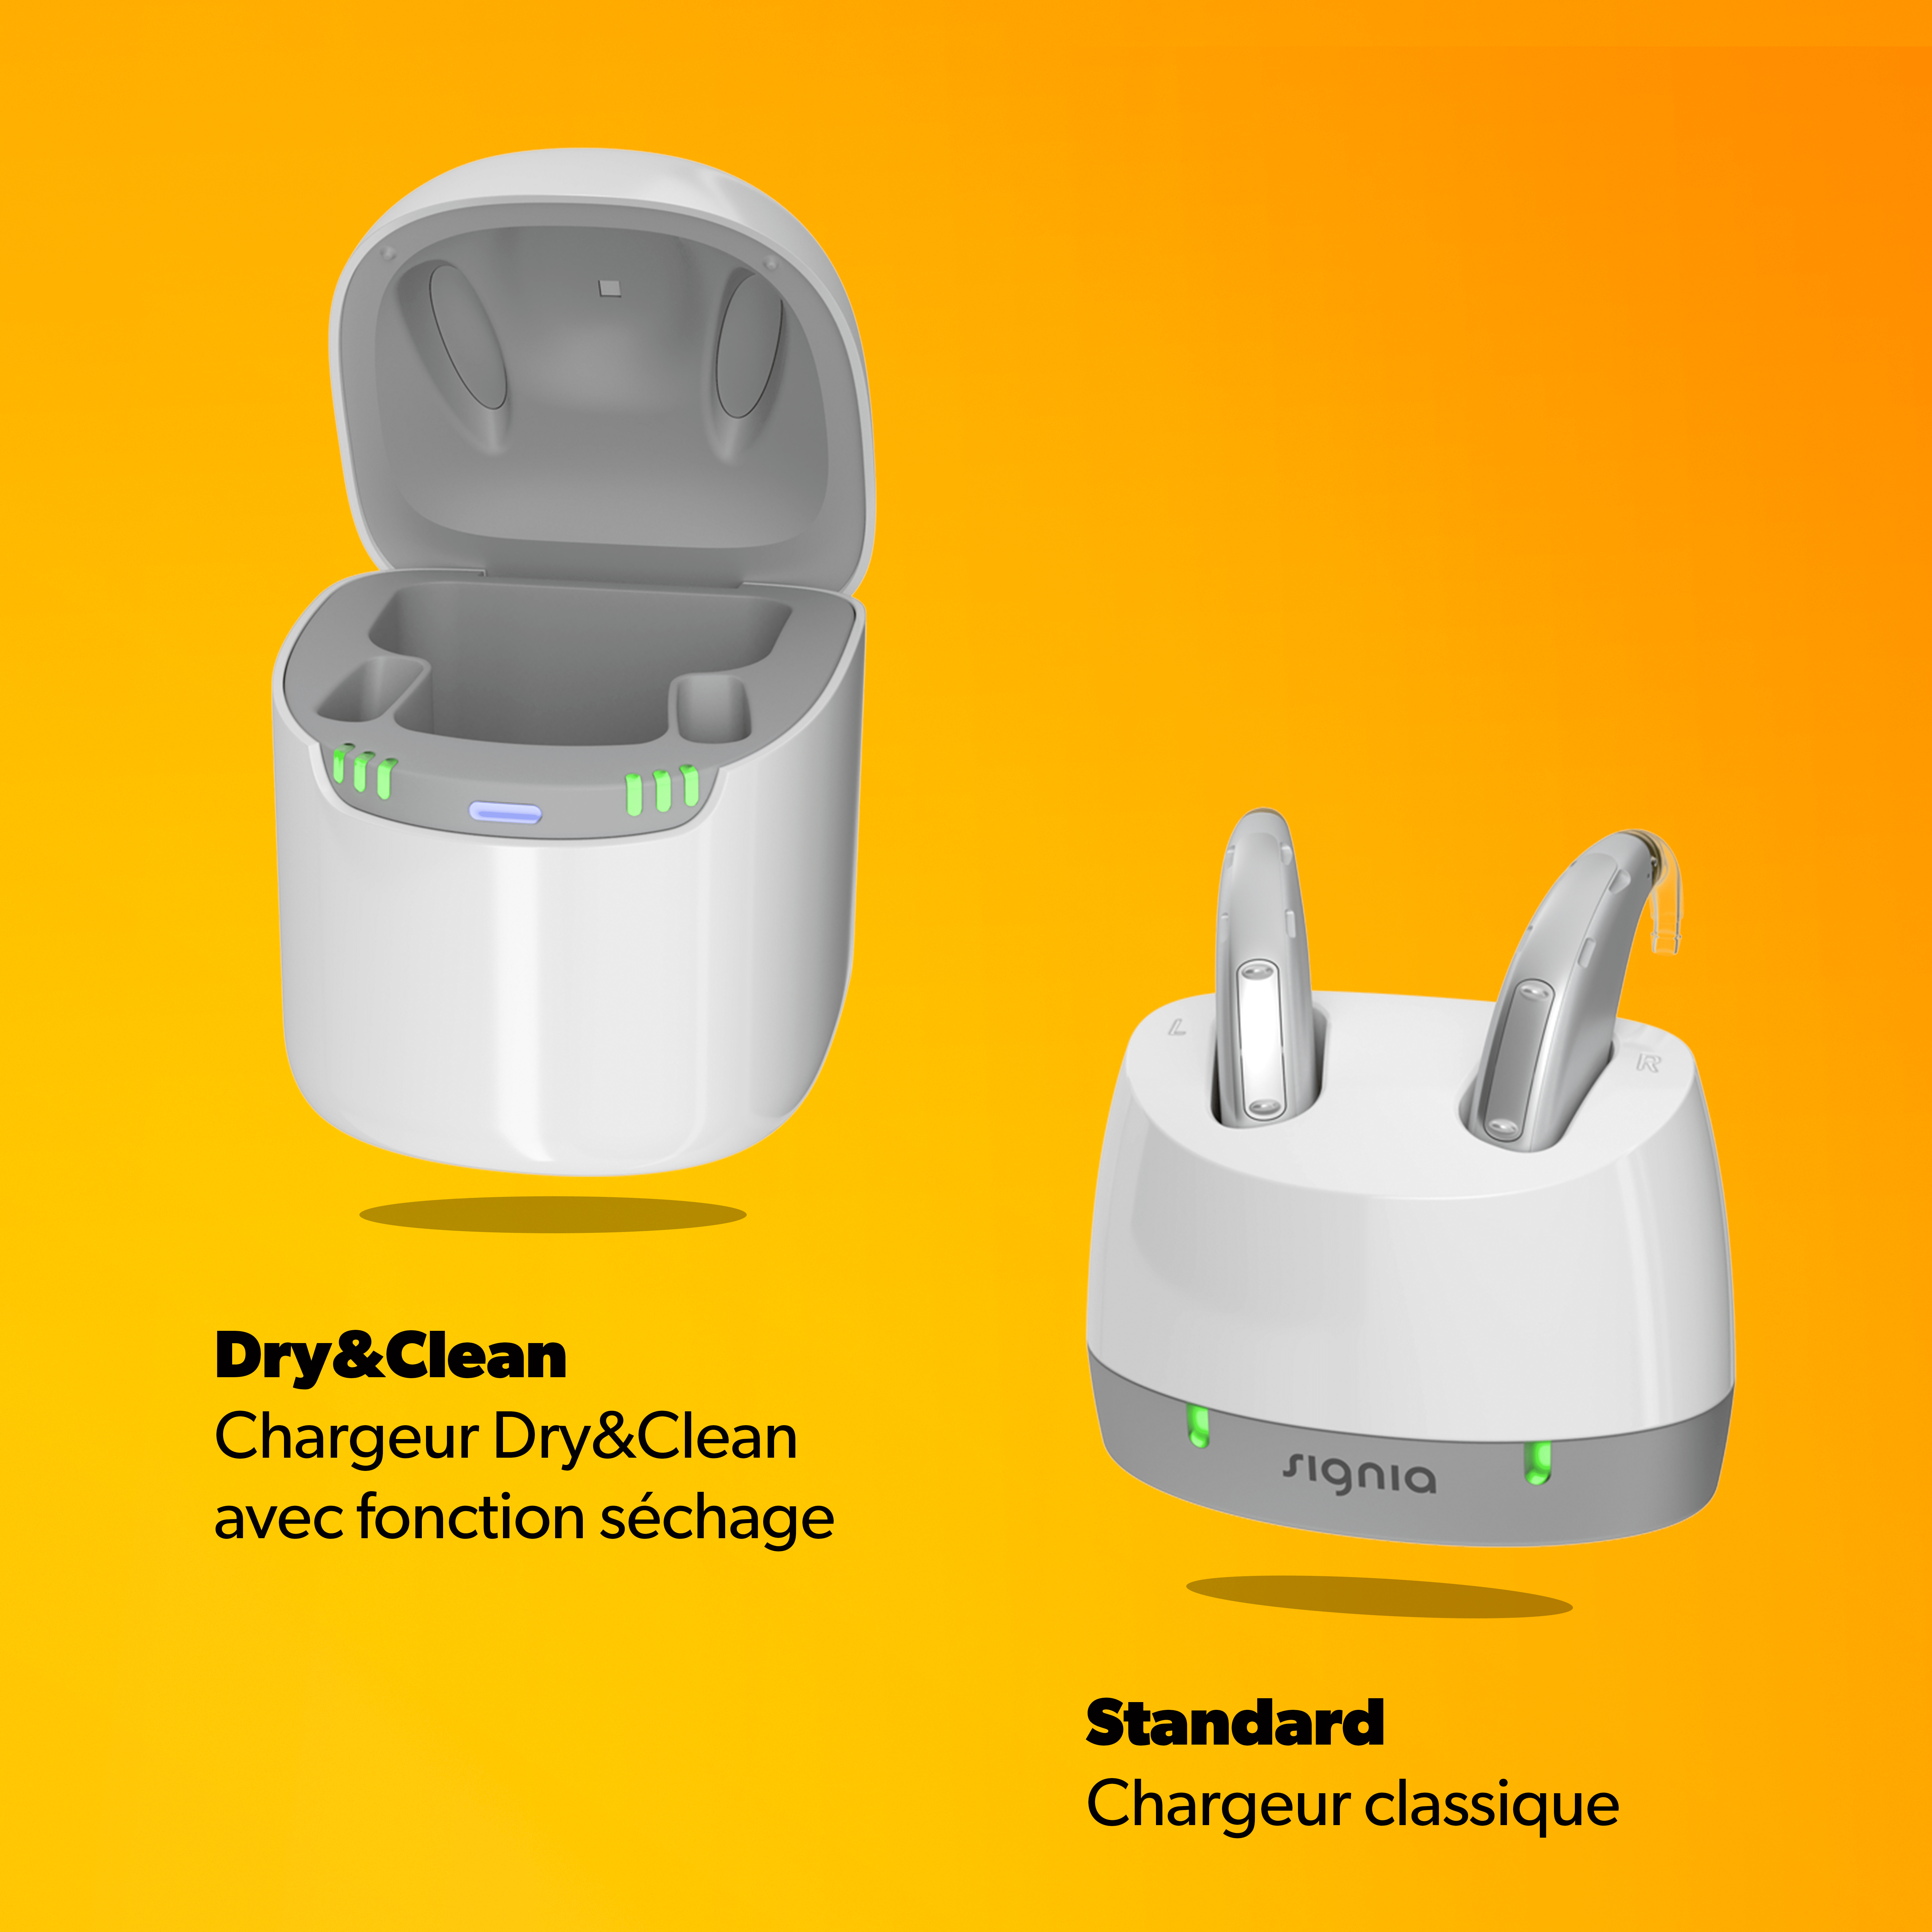 Chargeur Dry&Clean et chargeur Standard